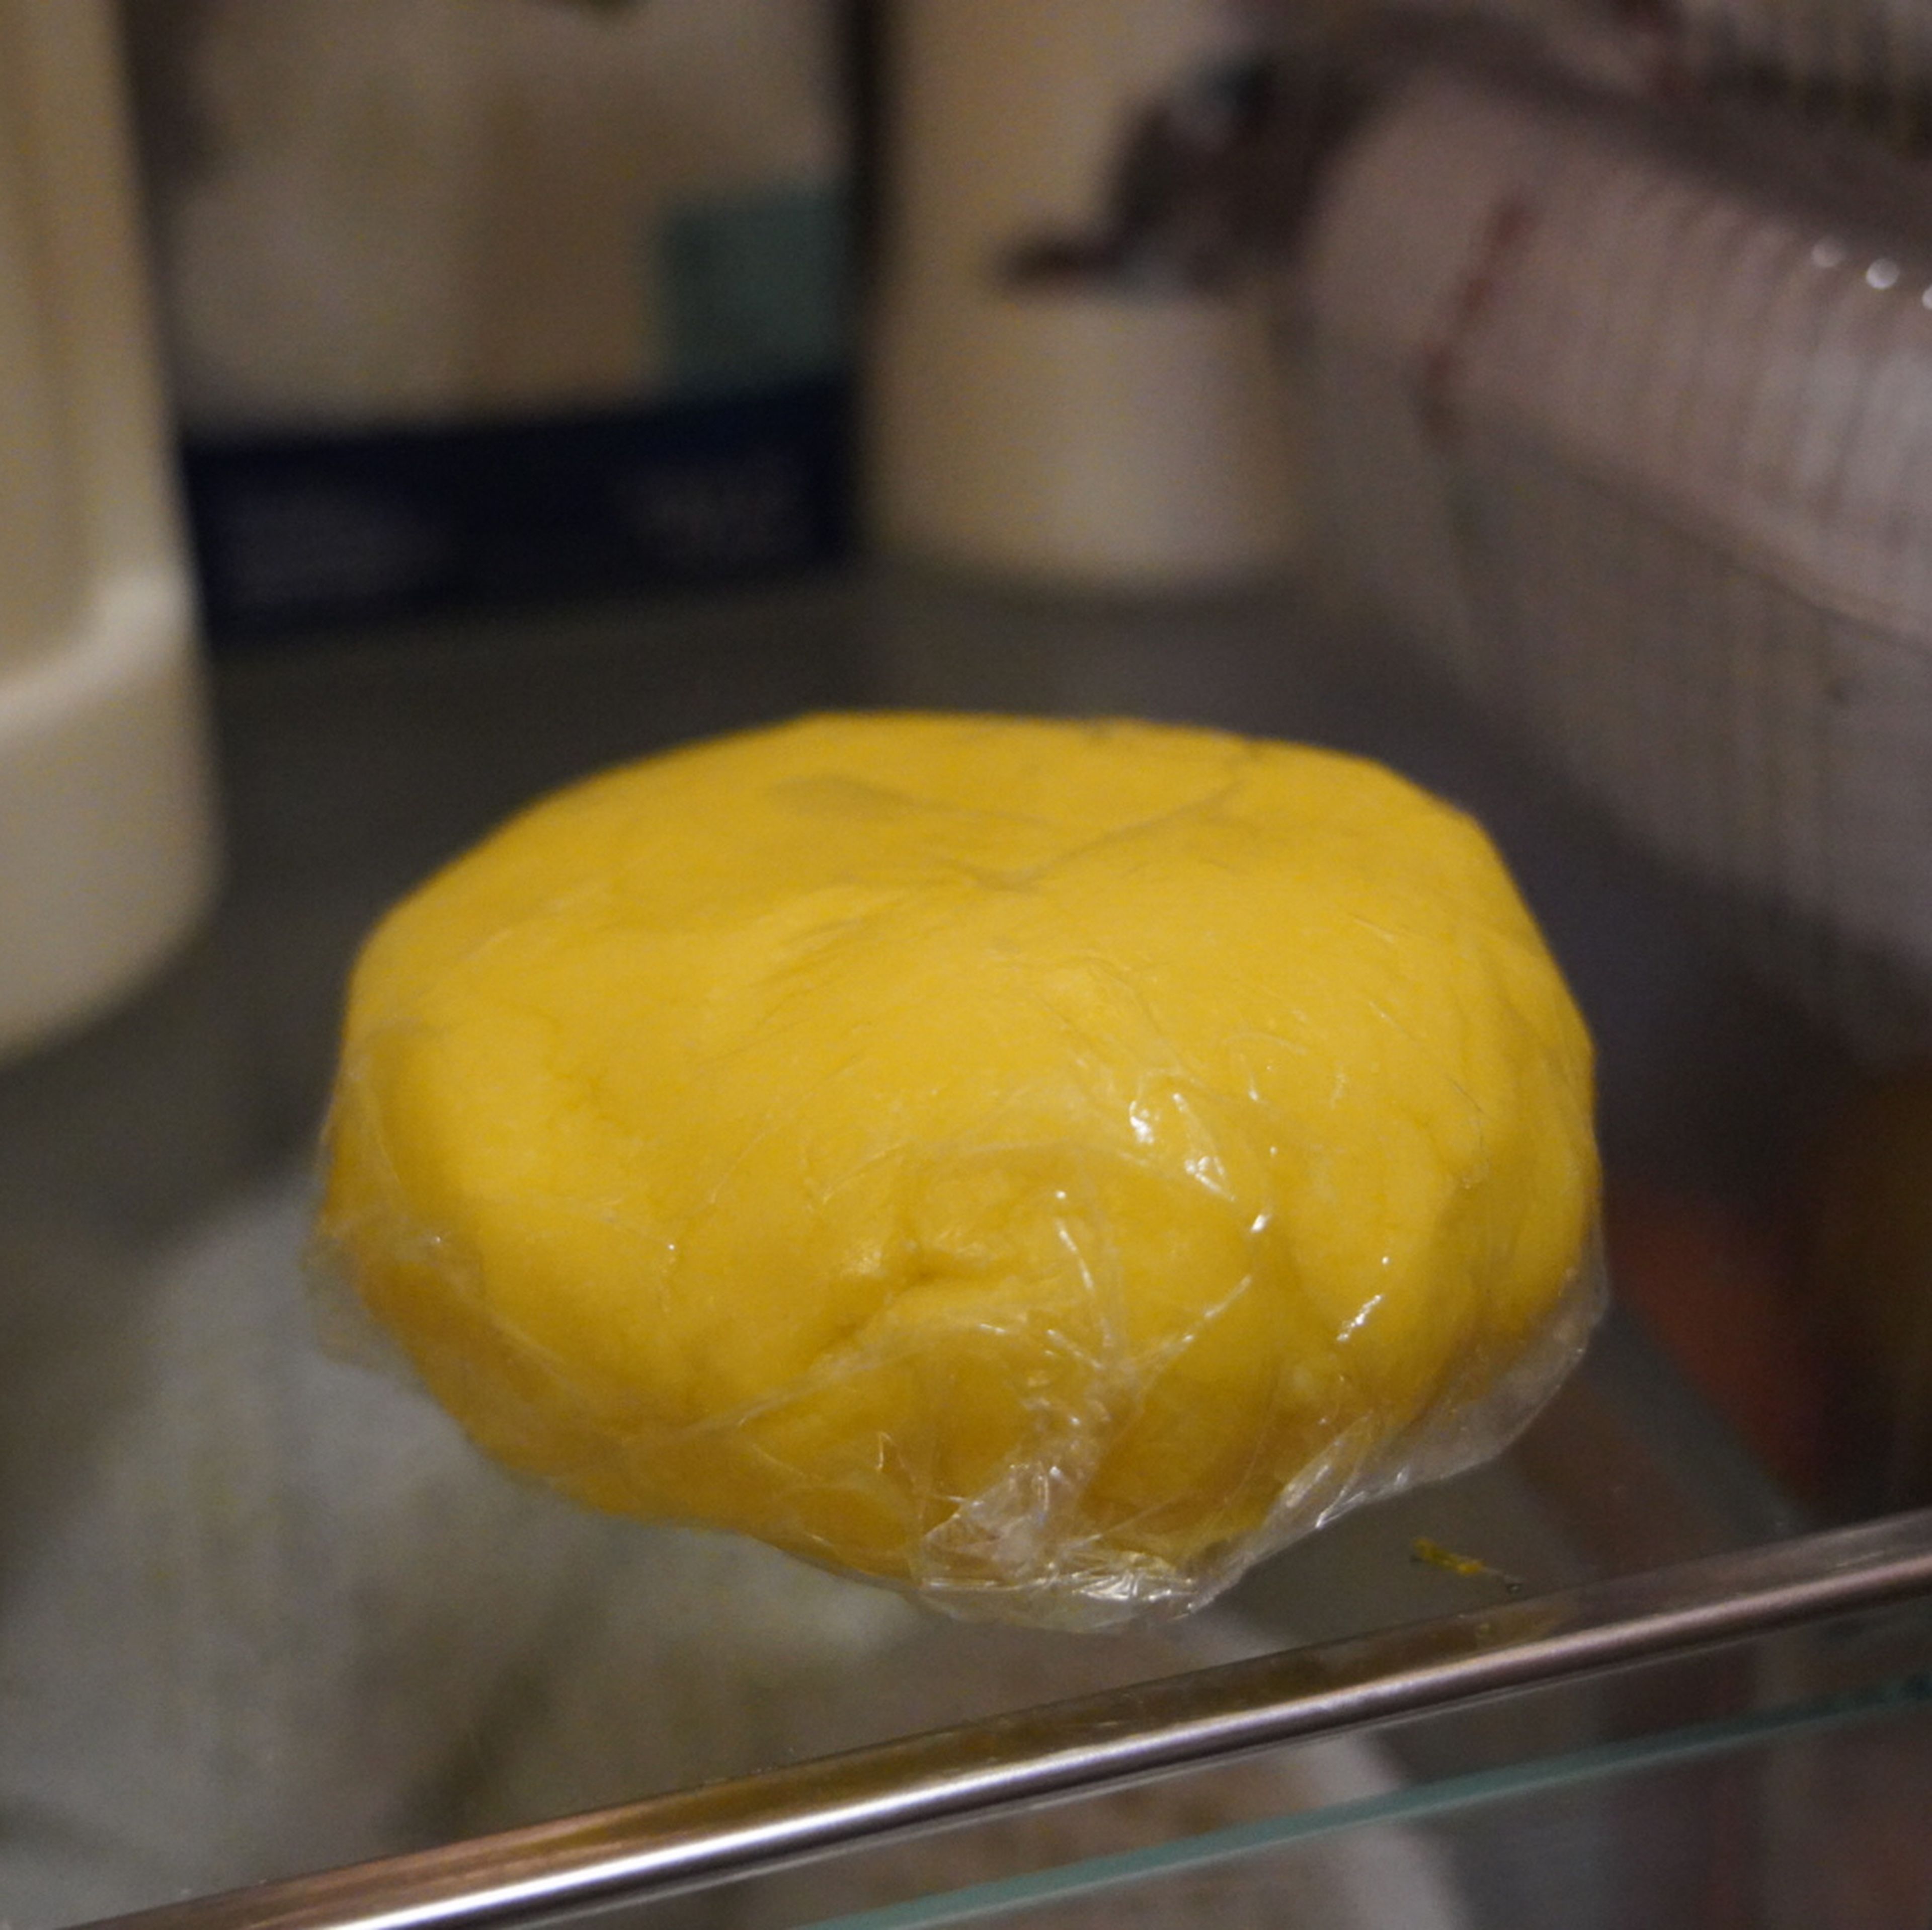 Combine until a dough forms, place in the fridge (cold storage) for 30 minutes.